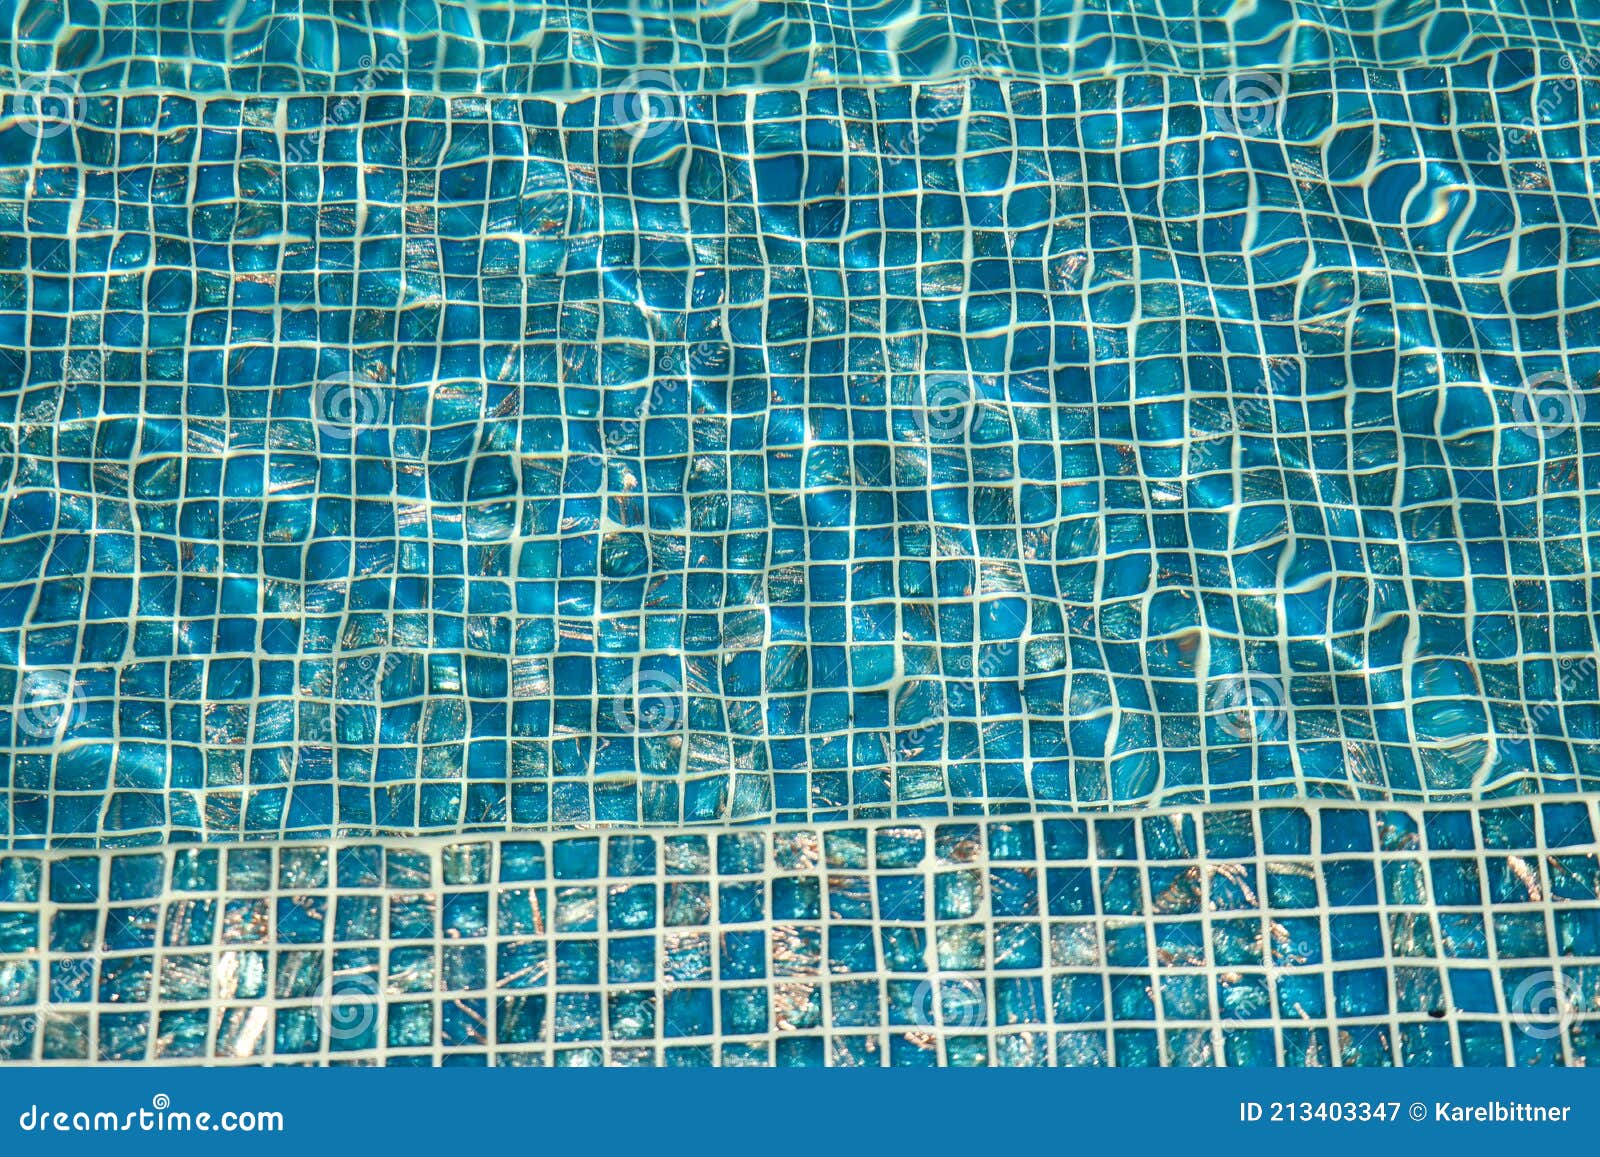 A Pool With Blue Ceramic Tiles And Water Ripple Effect Refection Of